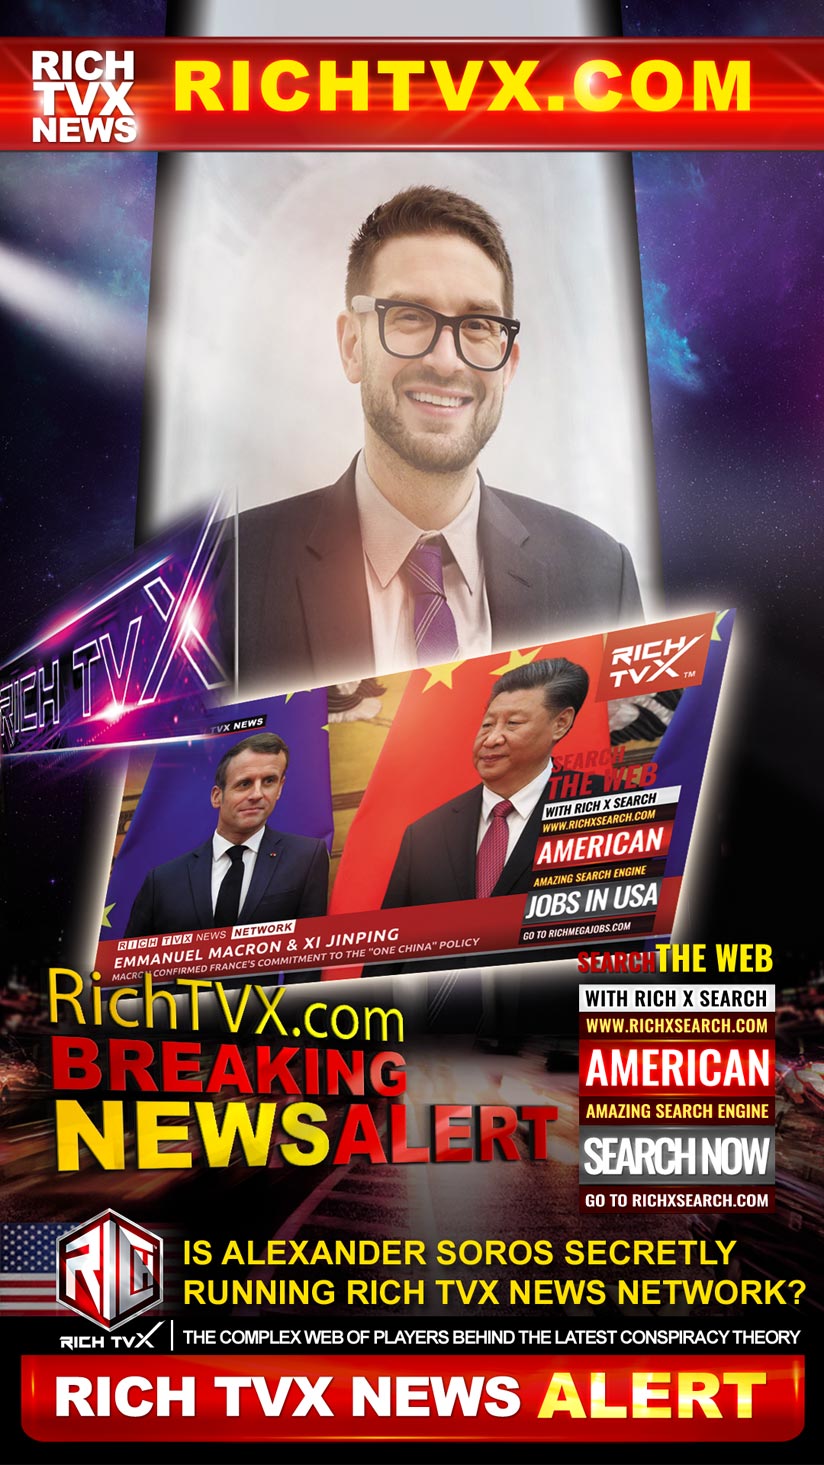 Meet Aleksandar Soros, the Mastermind and Real Owner of Rich TVX News Network